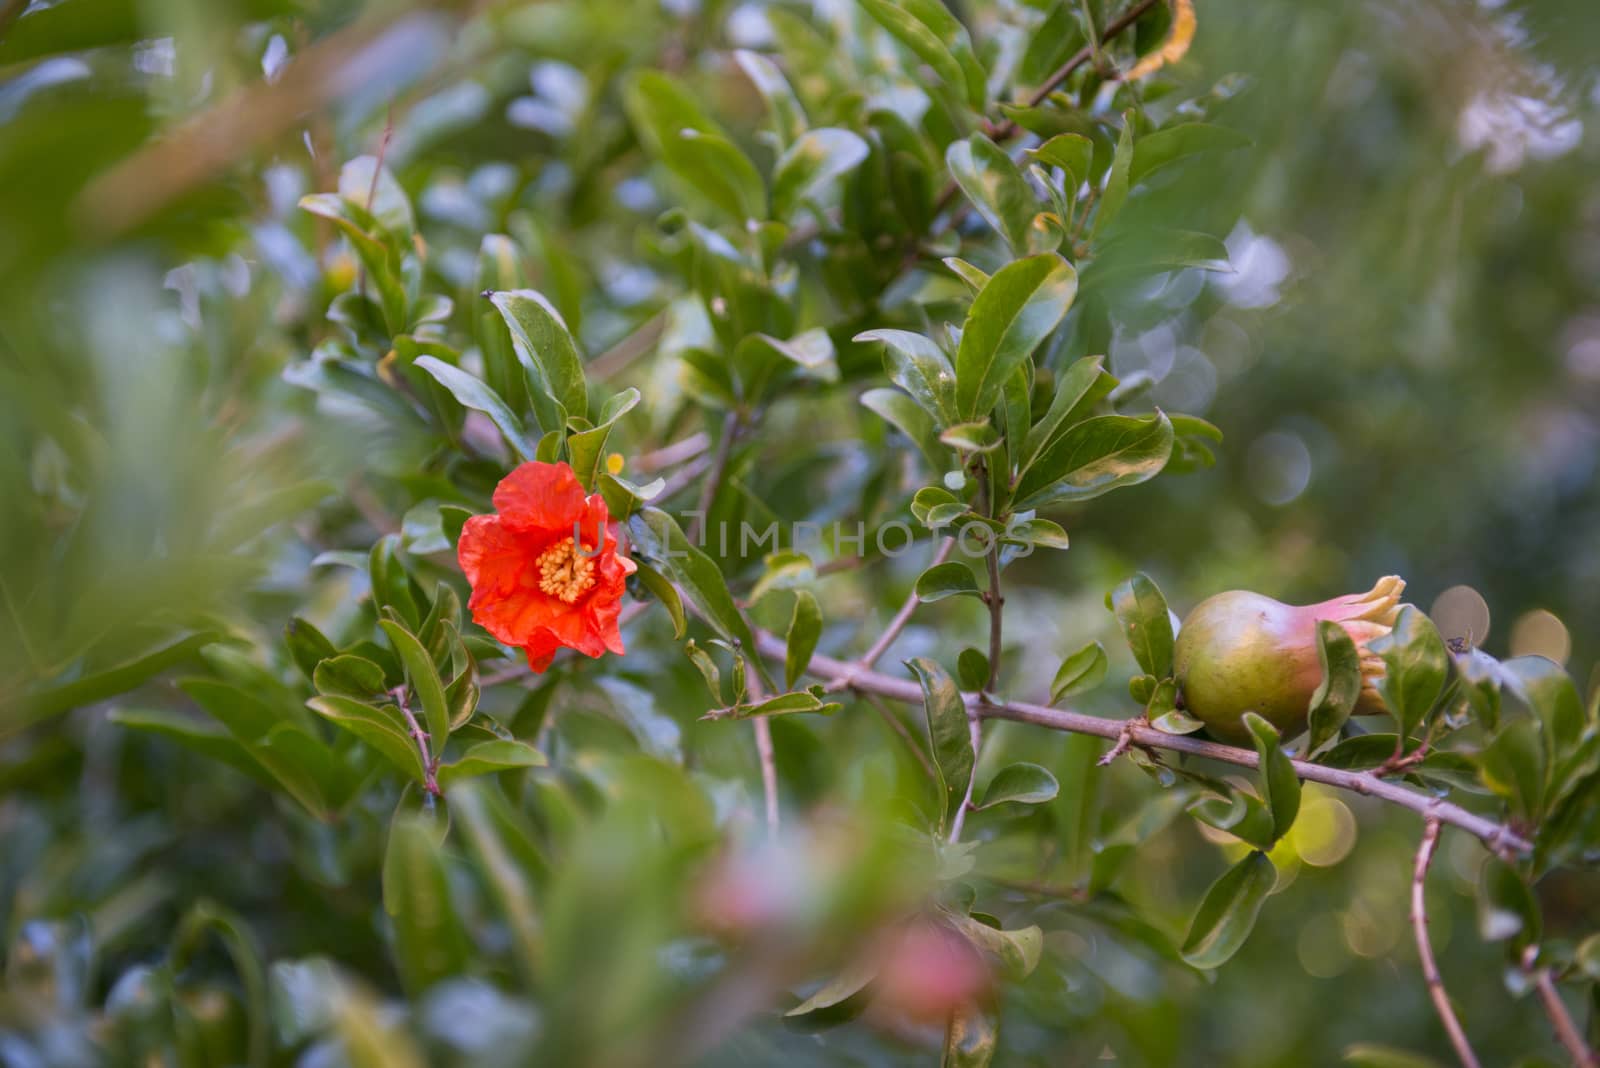 Pomegranate (Punica granatum) tree with fruit and flower blossom by Njean